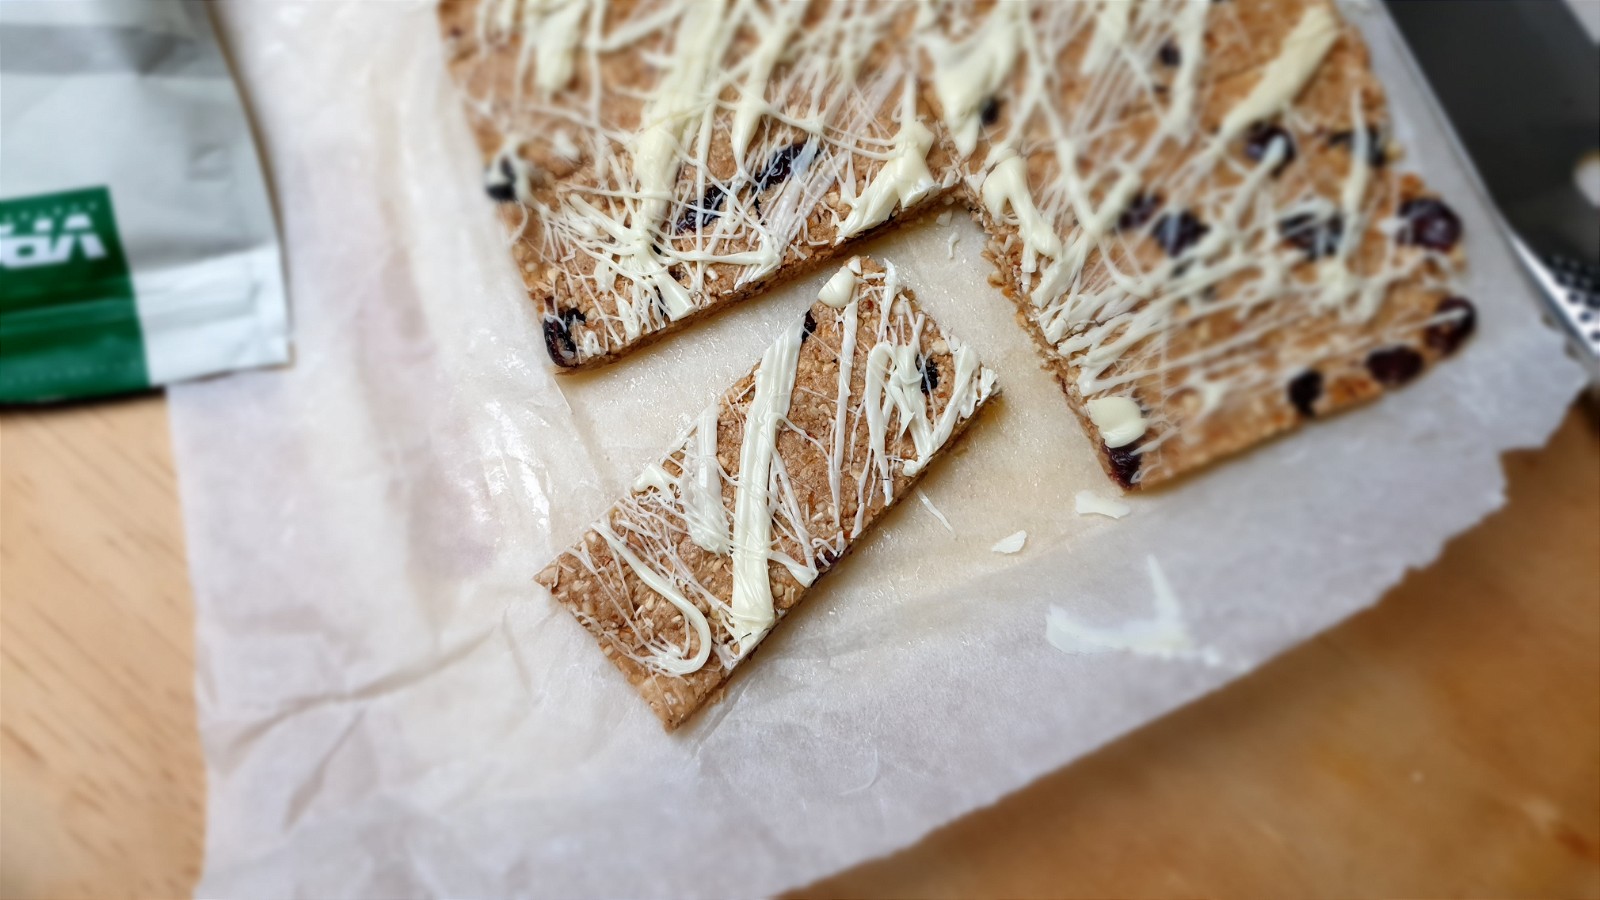 Image of Almond Cranberry Bars